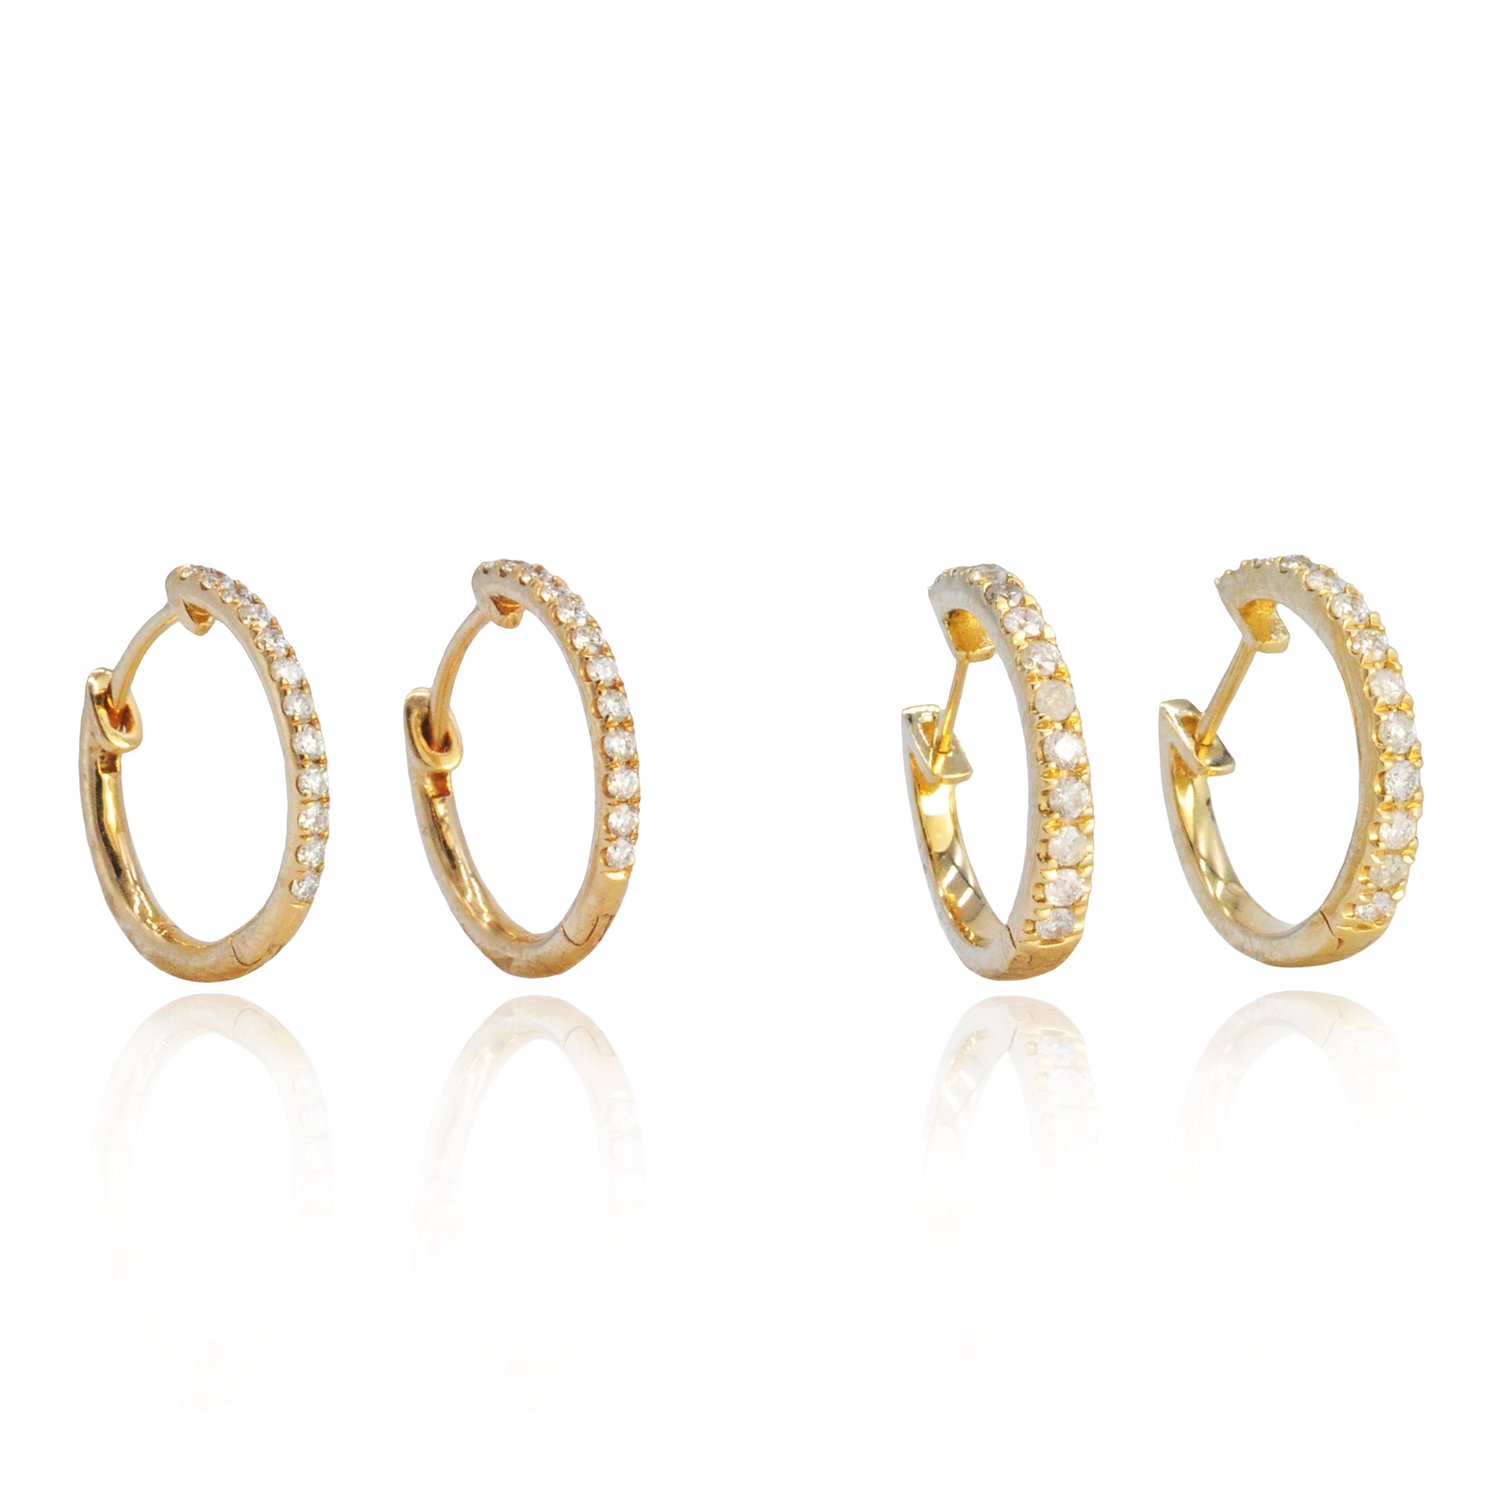 Gold Huggie Hoop Earrings with Diamonds & Charms — Rebecca Myers Design